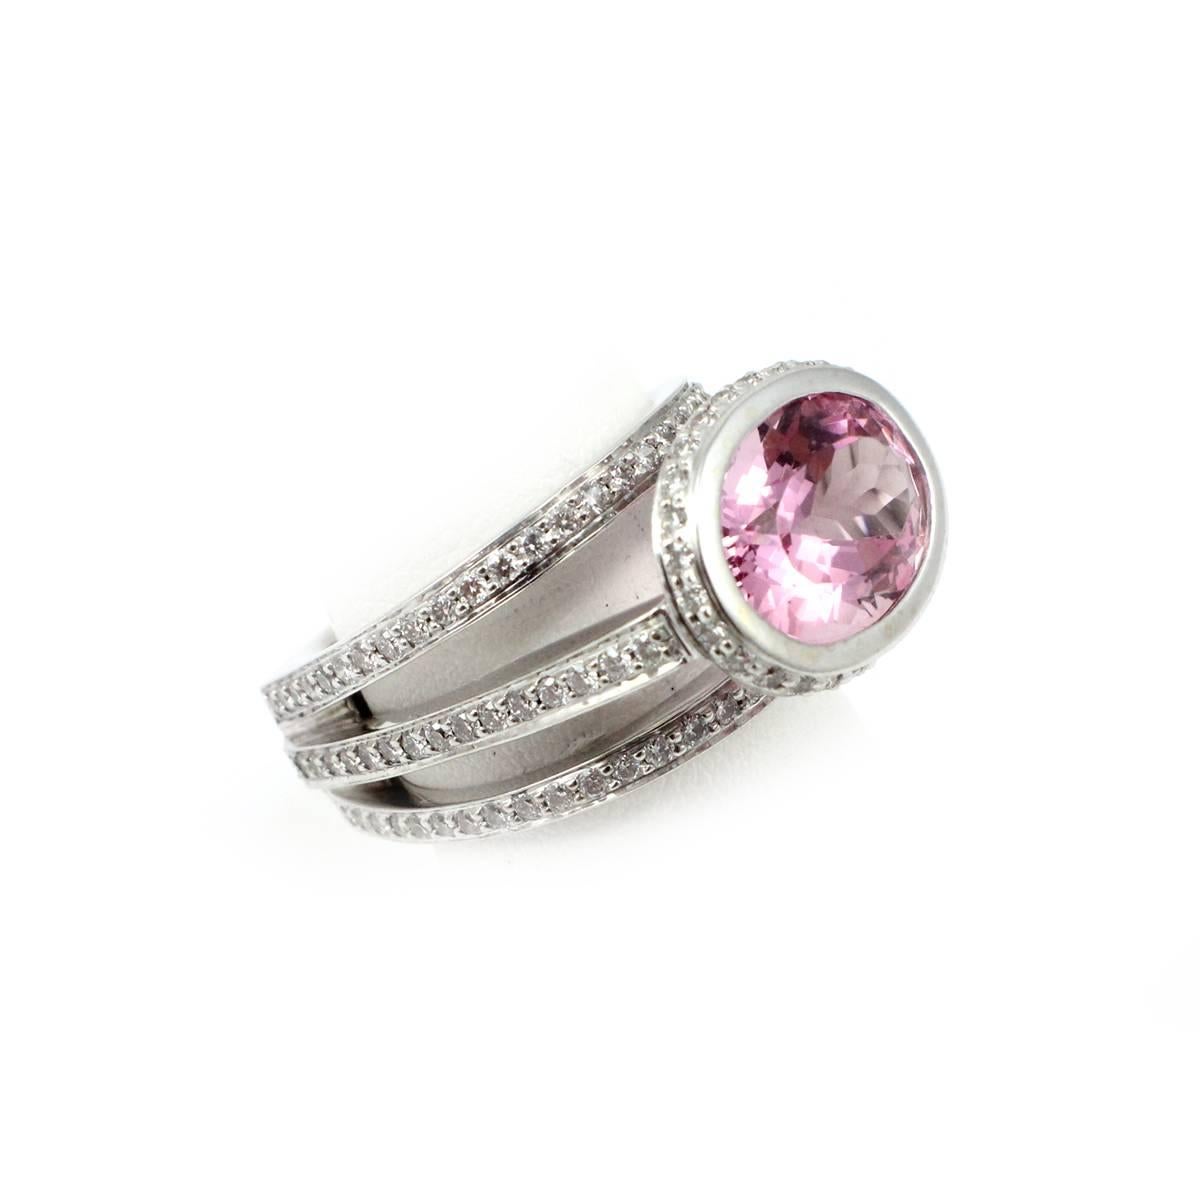 This custom ring by Scott Gauthier is crafted in 14k white gold. At its center is a bezel-set, 5.40ct pink tourmaline stone. The ring features three shanks that are set with round, brilliant-cut diamonds. The diamonds have a total weight of 1.00ct